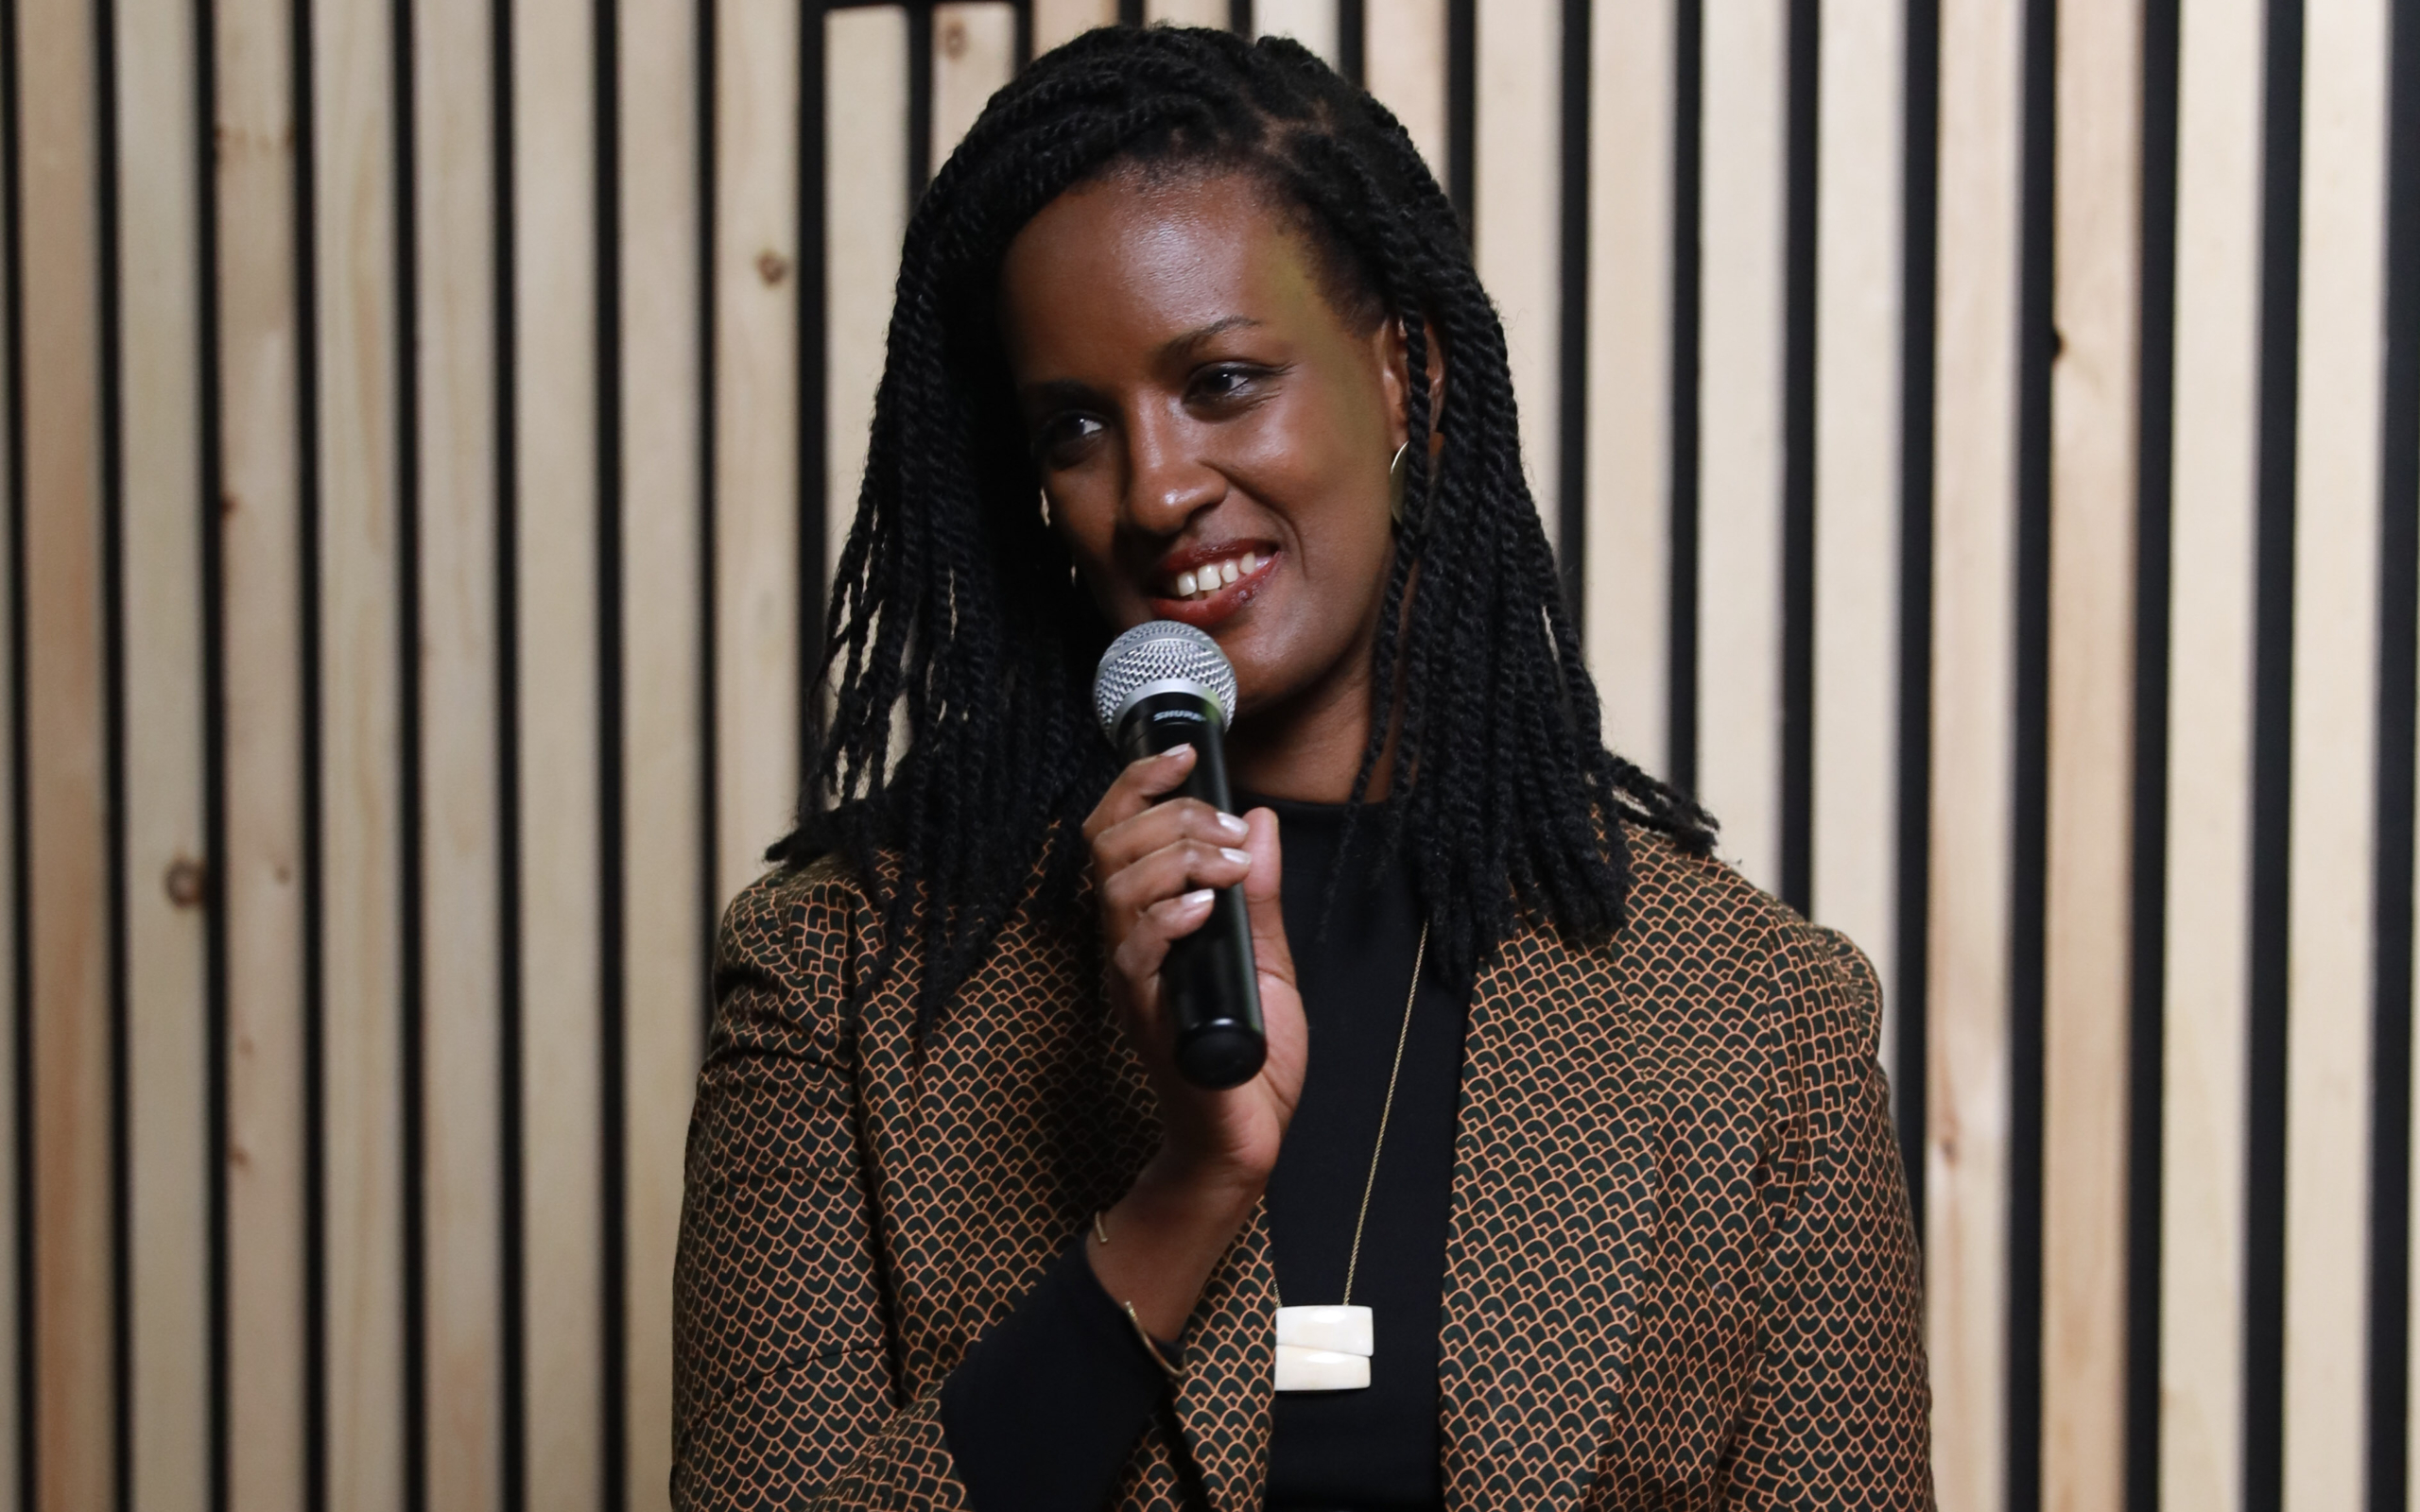 A woman in a tweed blazer and below-shoulder-length braids smiles while speaking into a microphone.